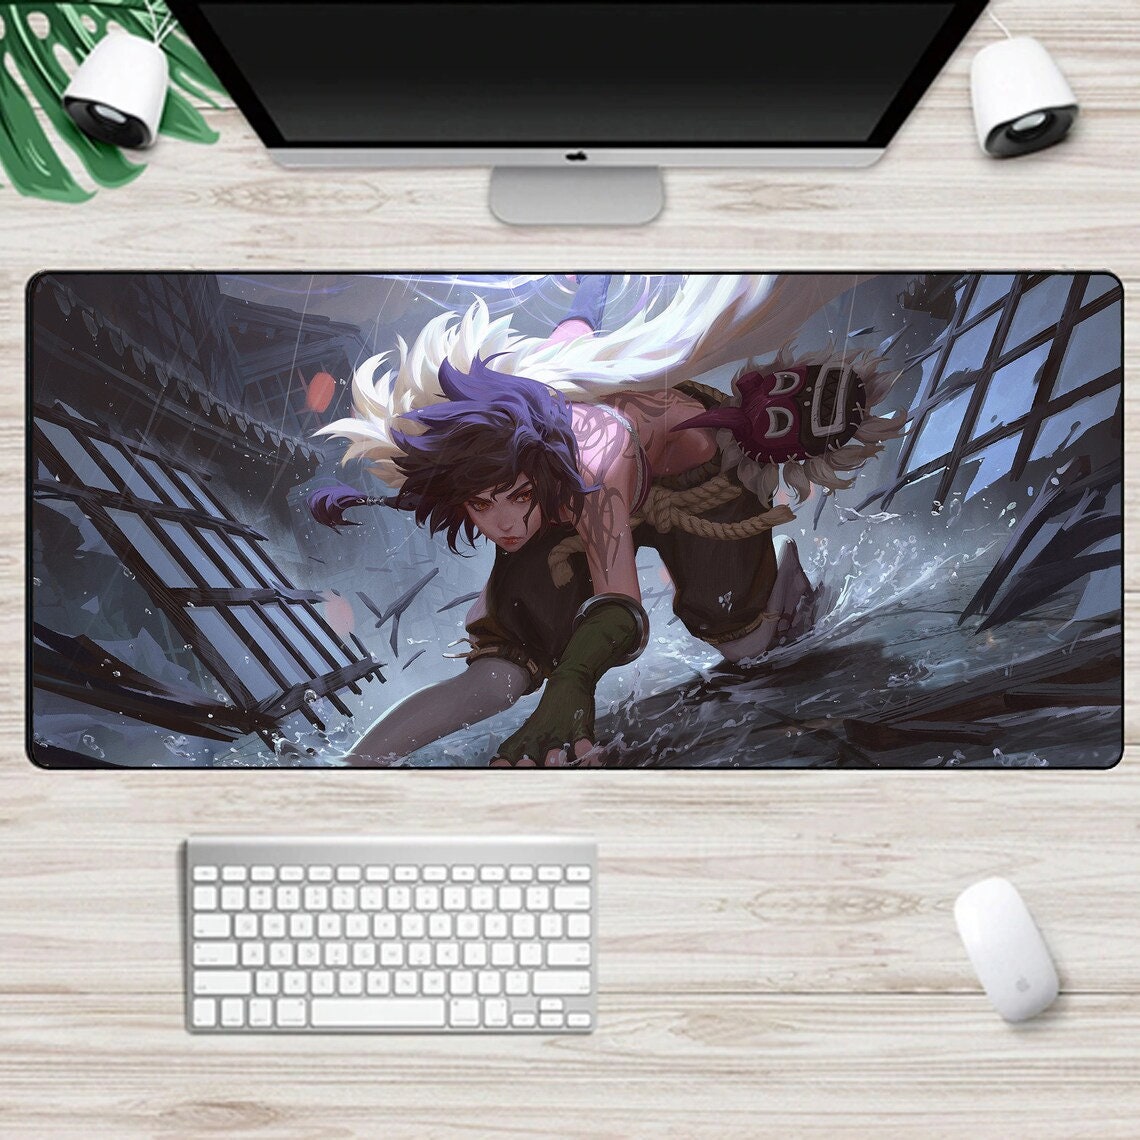 Mouse Pads Cute Girl Anime Gamer Mouse Pad RGB Laptop Keyboard Rug Rubber  Large Desk Mat LED Lighting Mause Pad XXL Pc 700x300x4MM  Yaxa Colombia